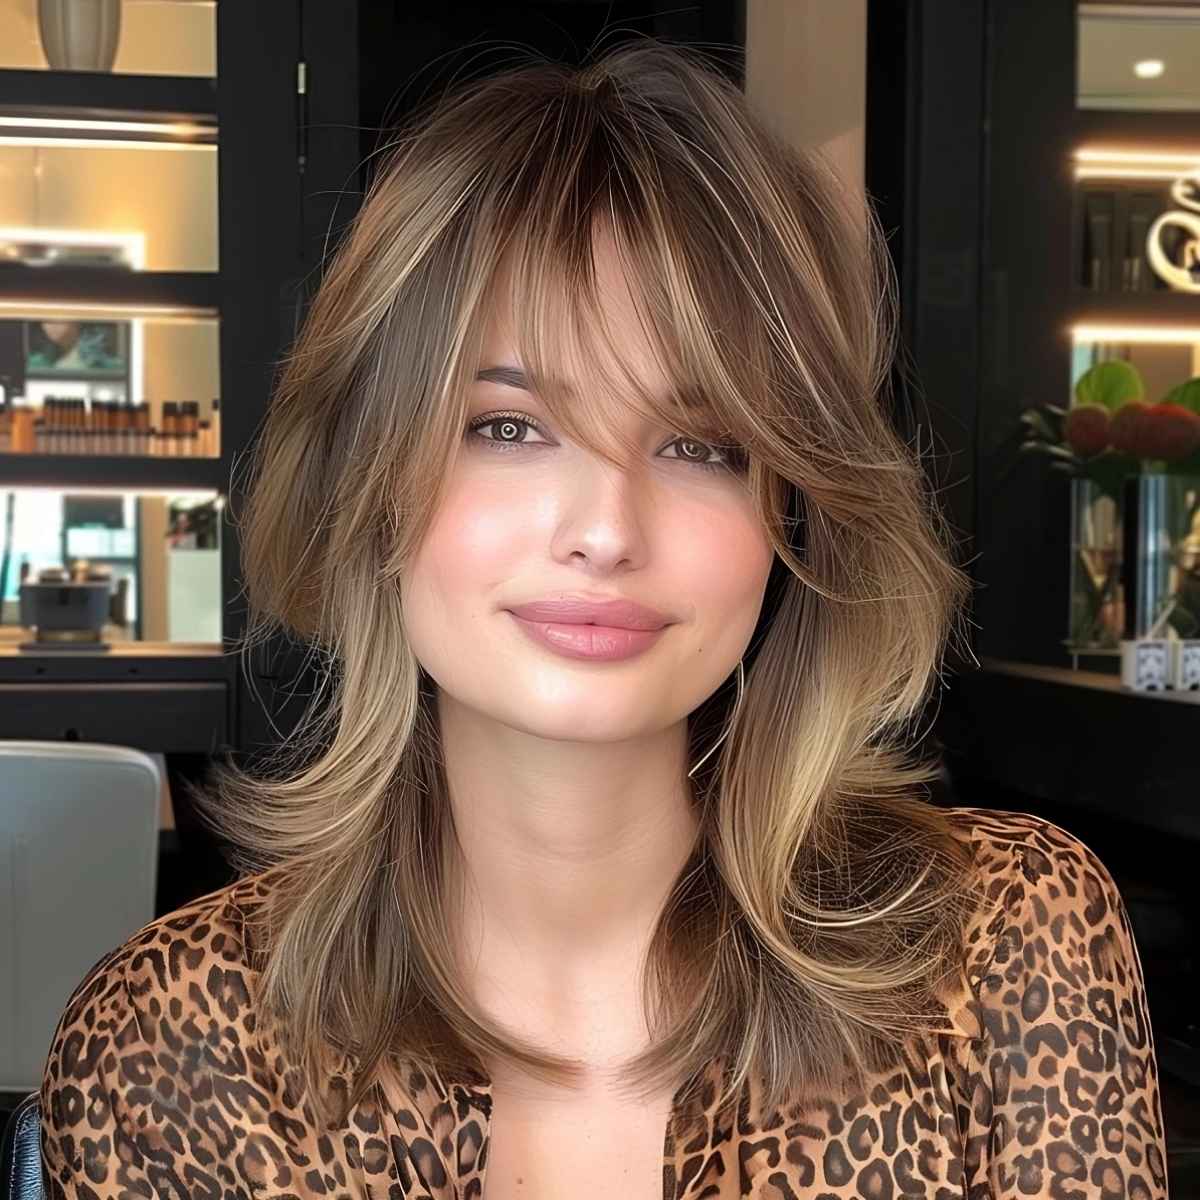 Mid-Length Razor Cut with Long Bangs and Short Layers for Square Faces